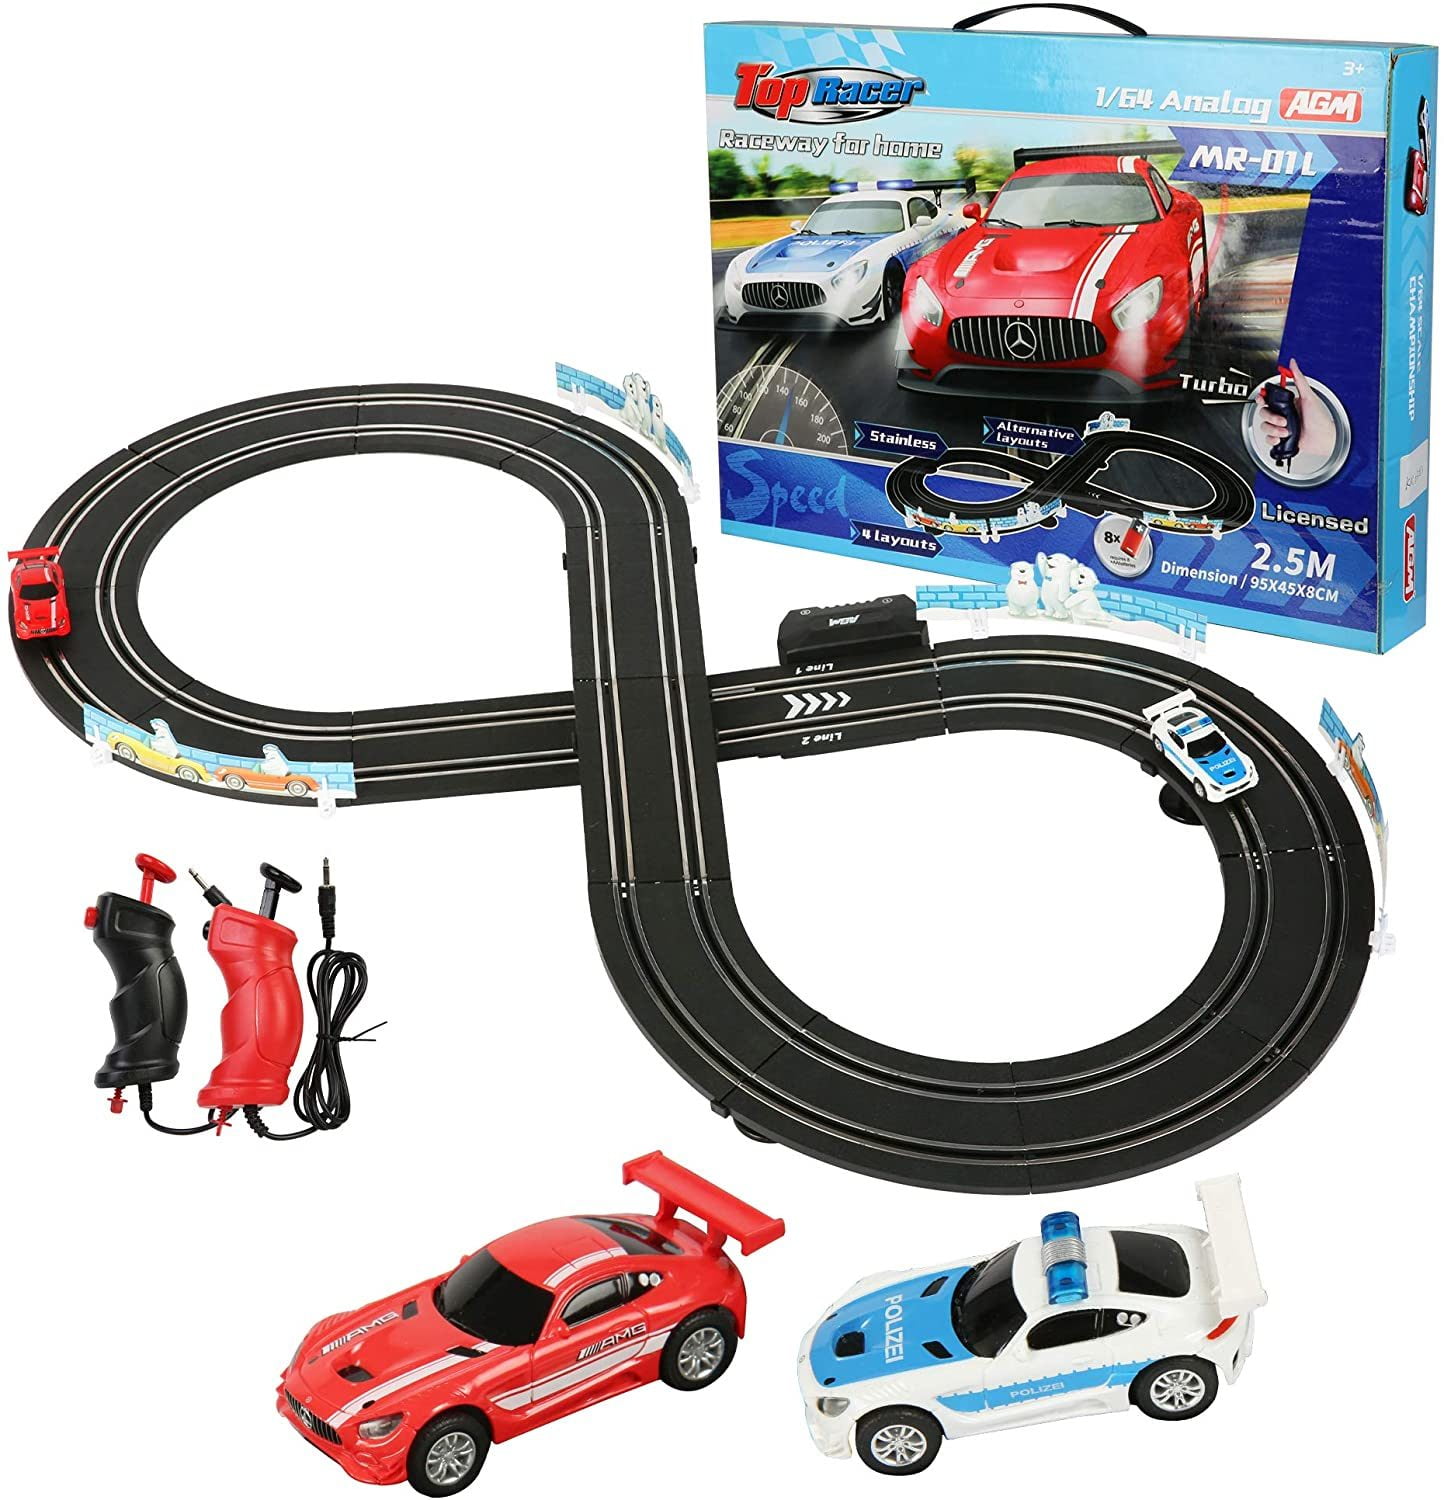 COLOR TREE Electric Racing Track Sets for Kids High-Speed Slot Car Dual Race Track Toys with 2 Cars for Adults Children Gifts 